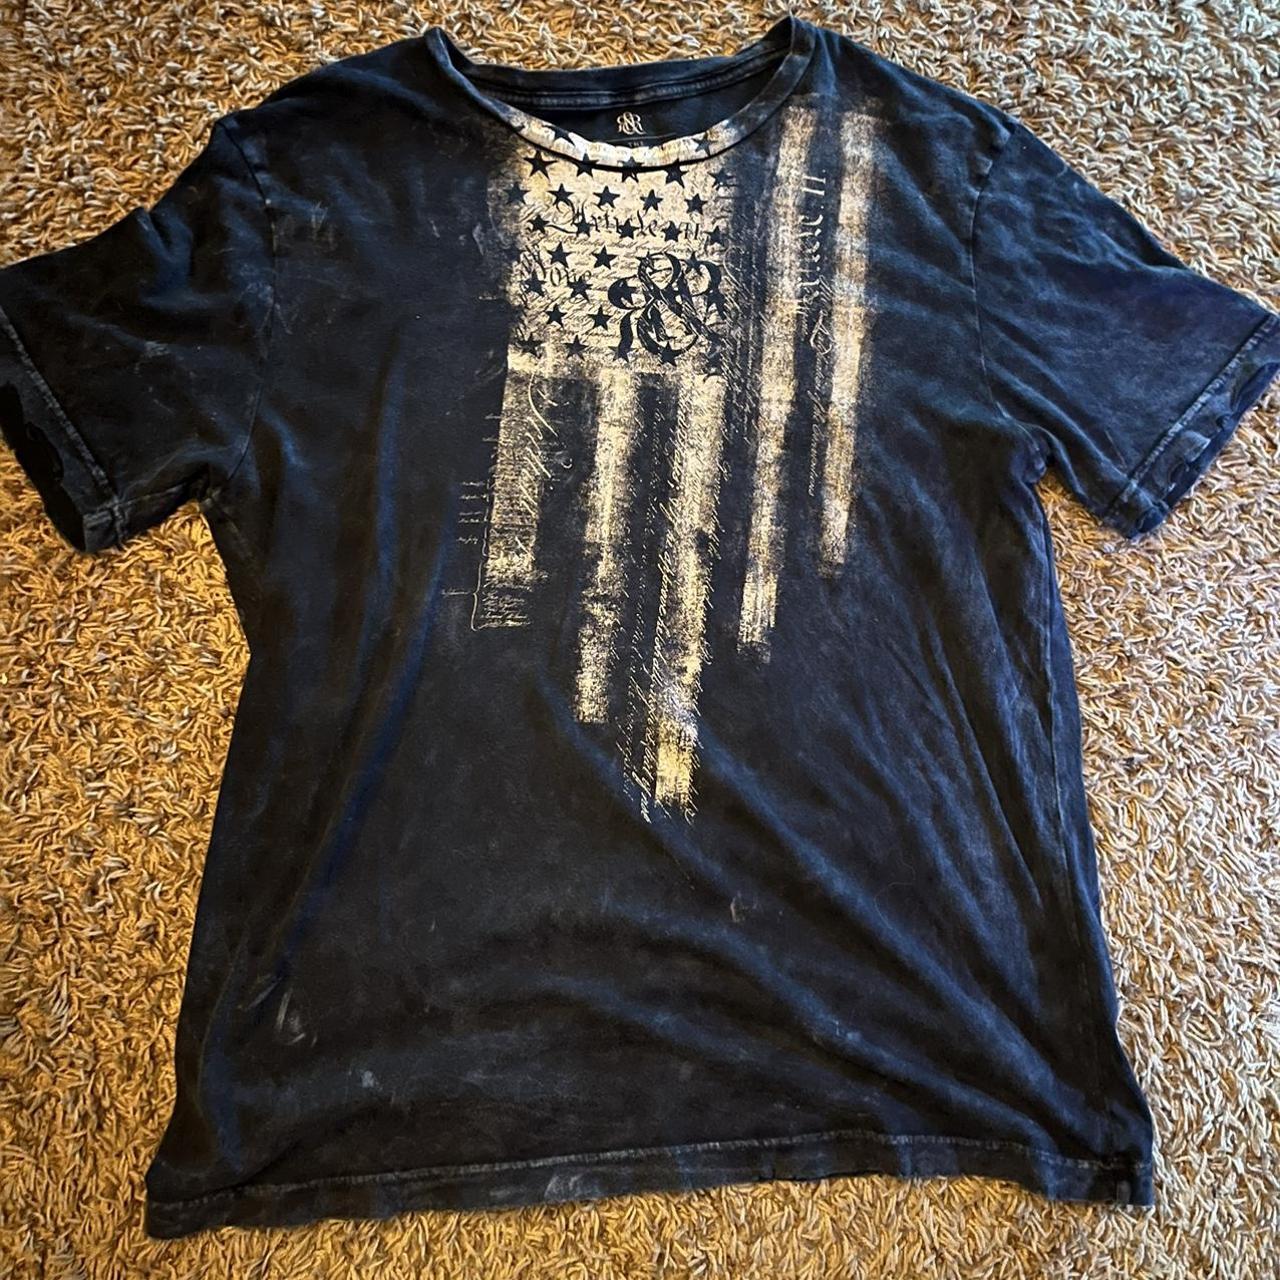 Rock and Republic Men's Navy and Blue T-shirt